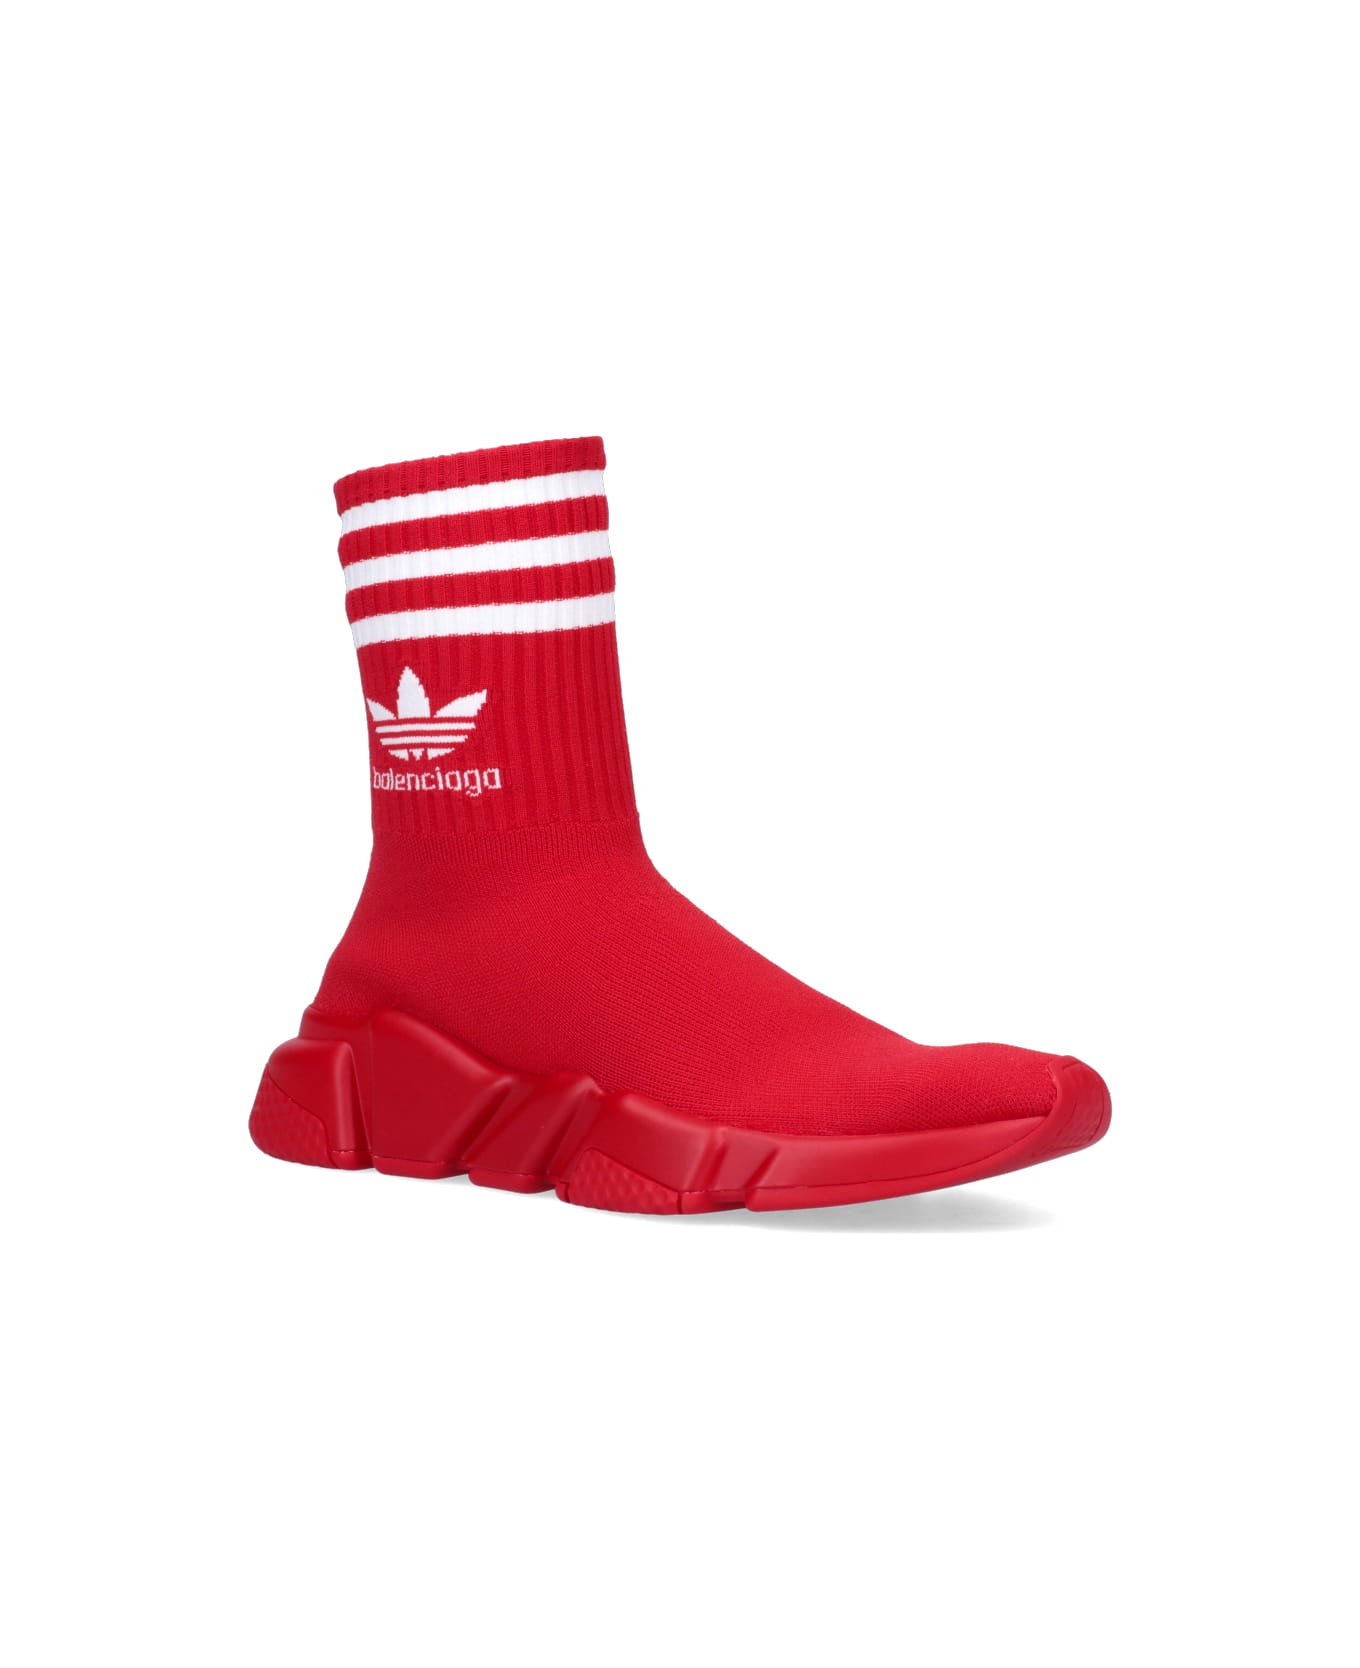 Balenciaga X Adidas -speed Trainers Knitted Sock-sneakers - red